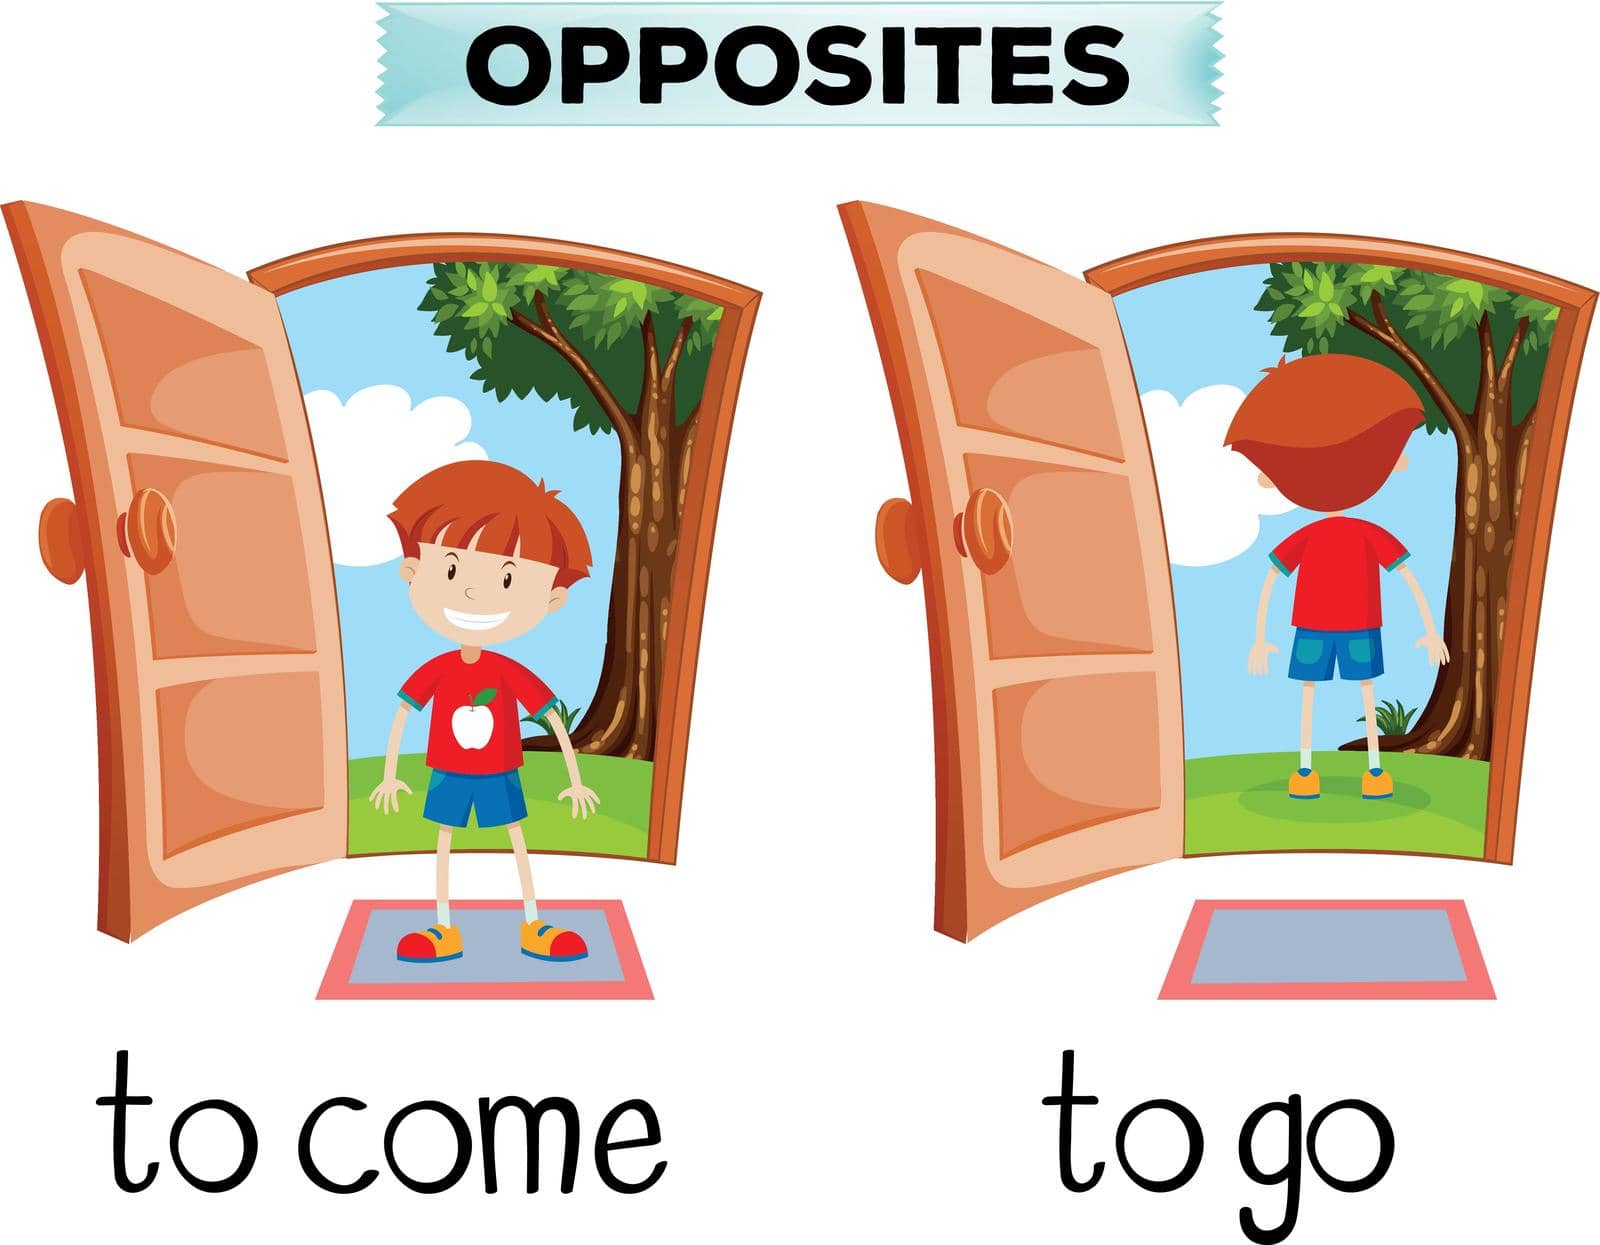 Opposite words for come and go illustration